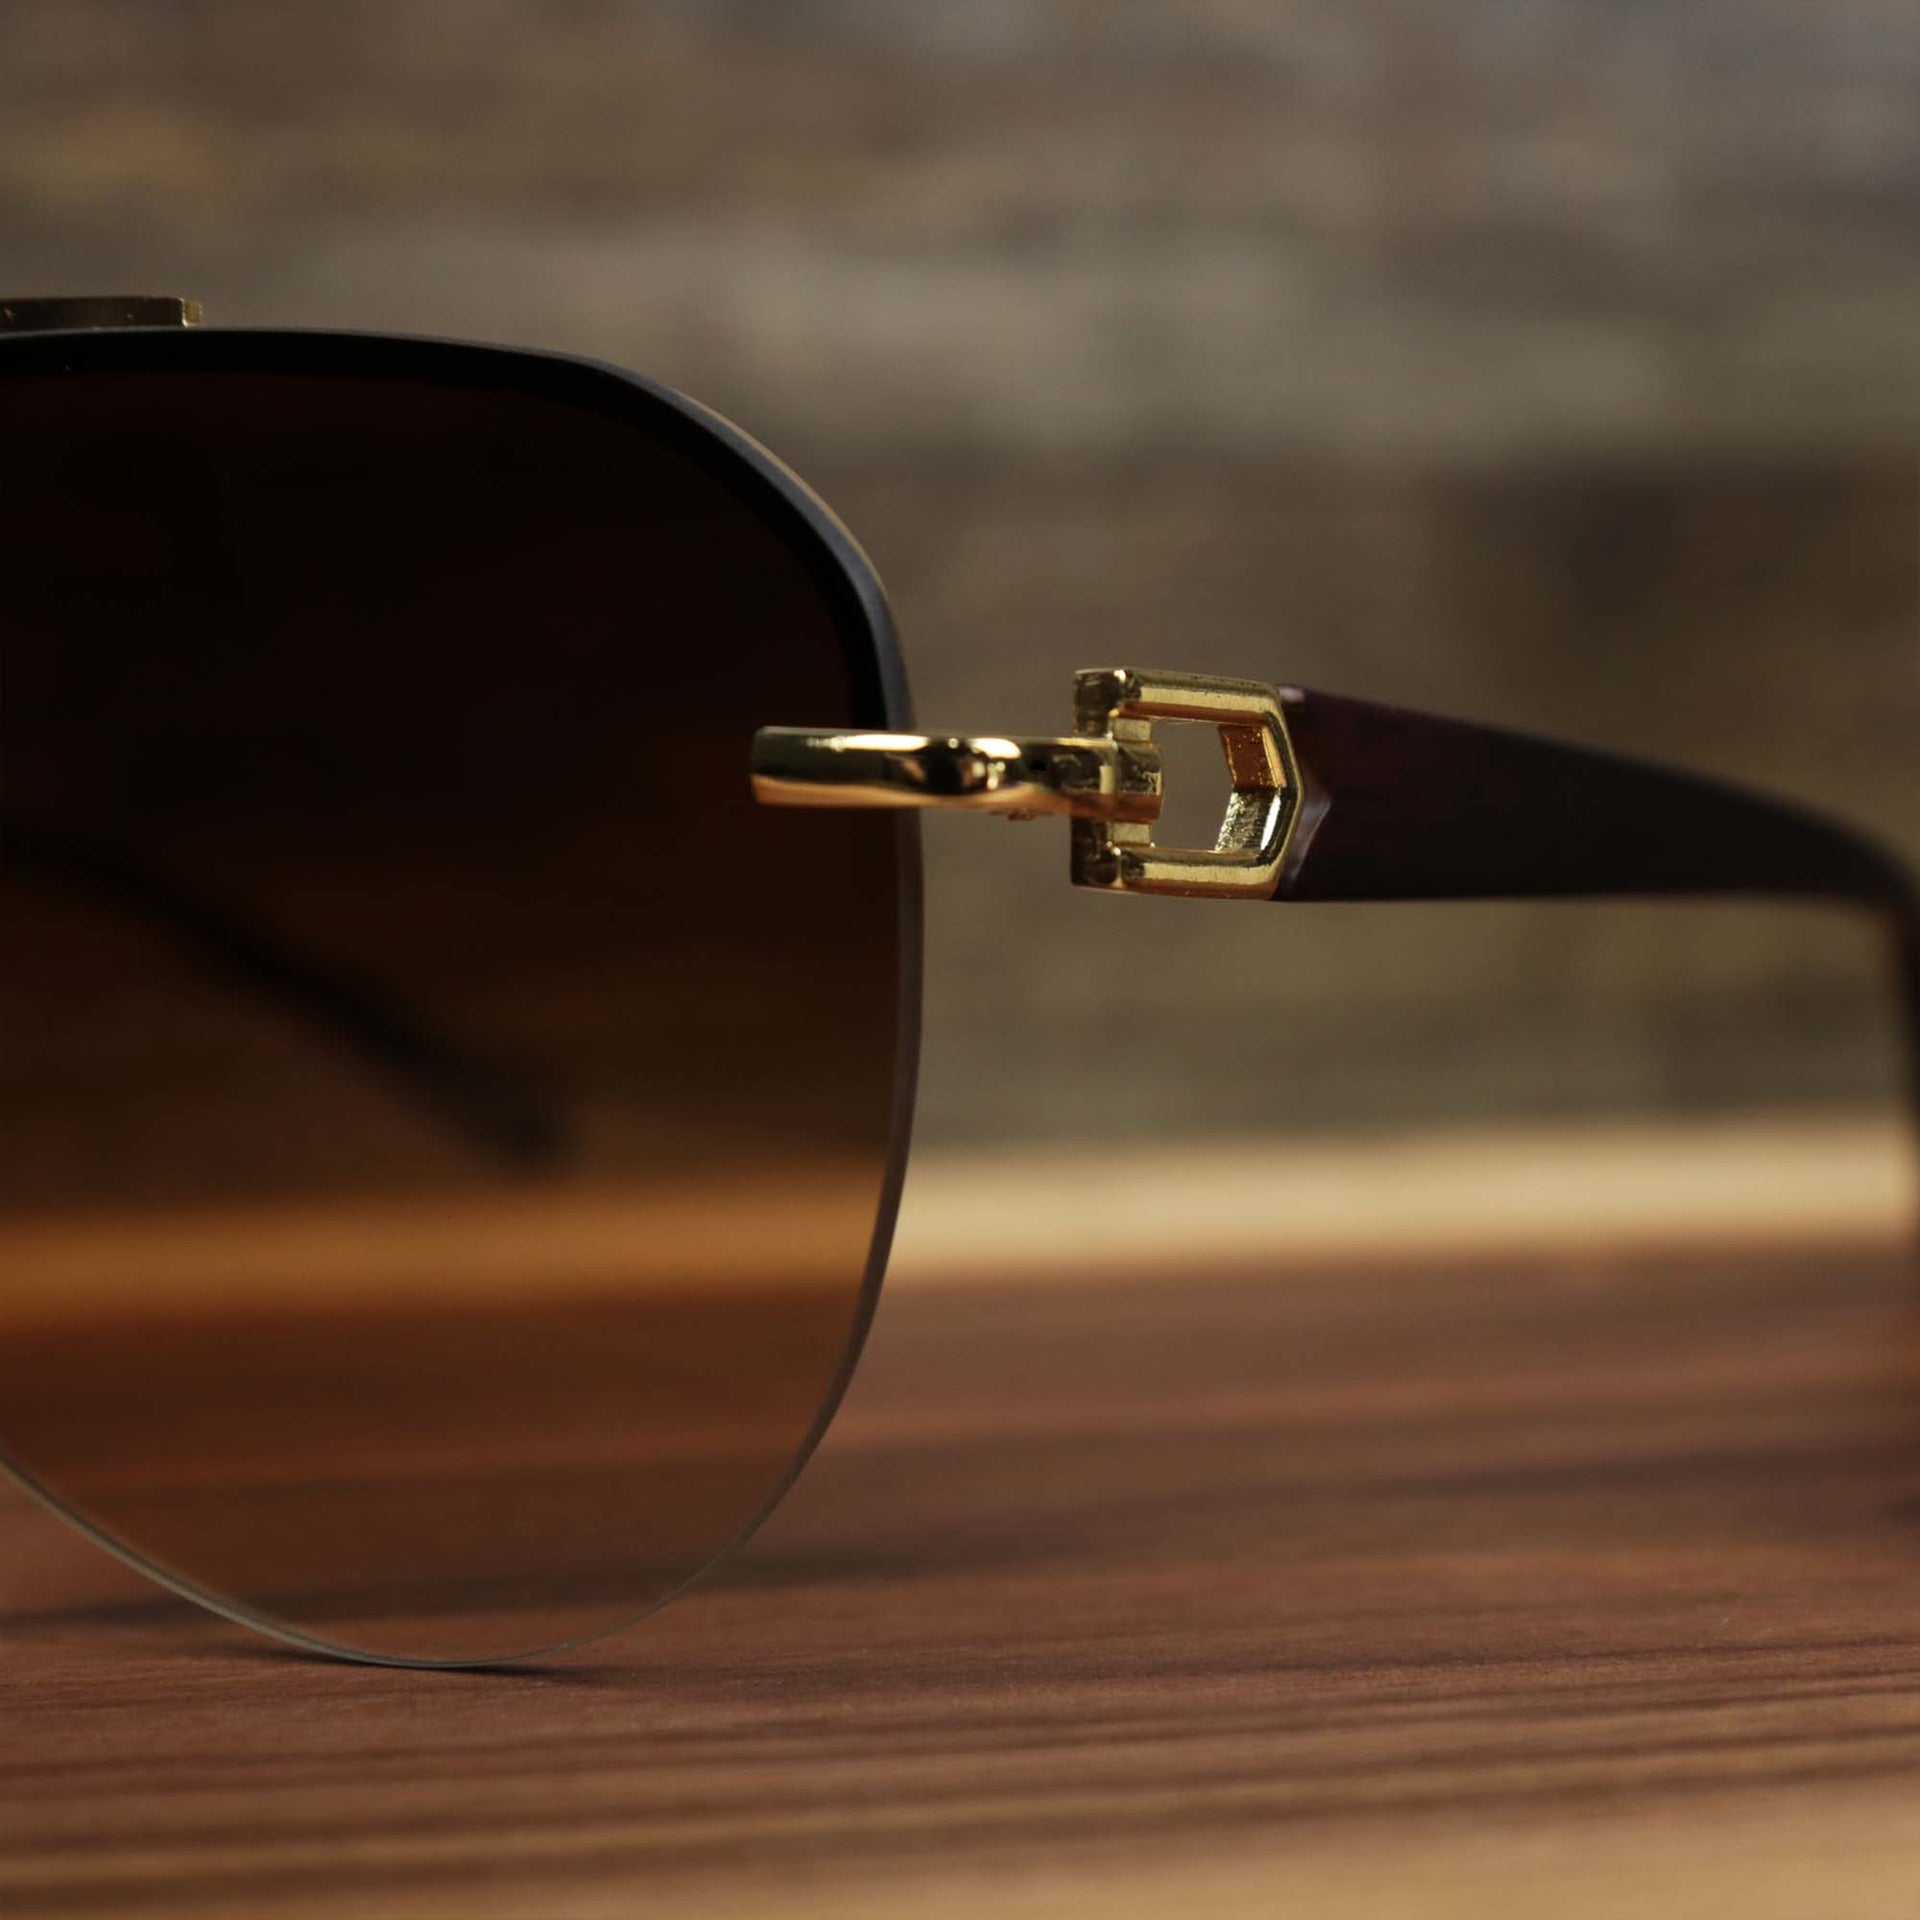 The hinge on the Round Aviator Frames Brown Gradient Lens Sunglasses with Gold Frame